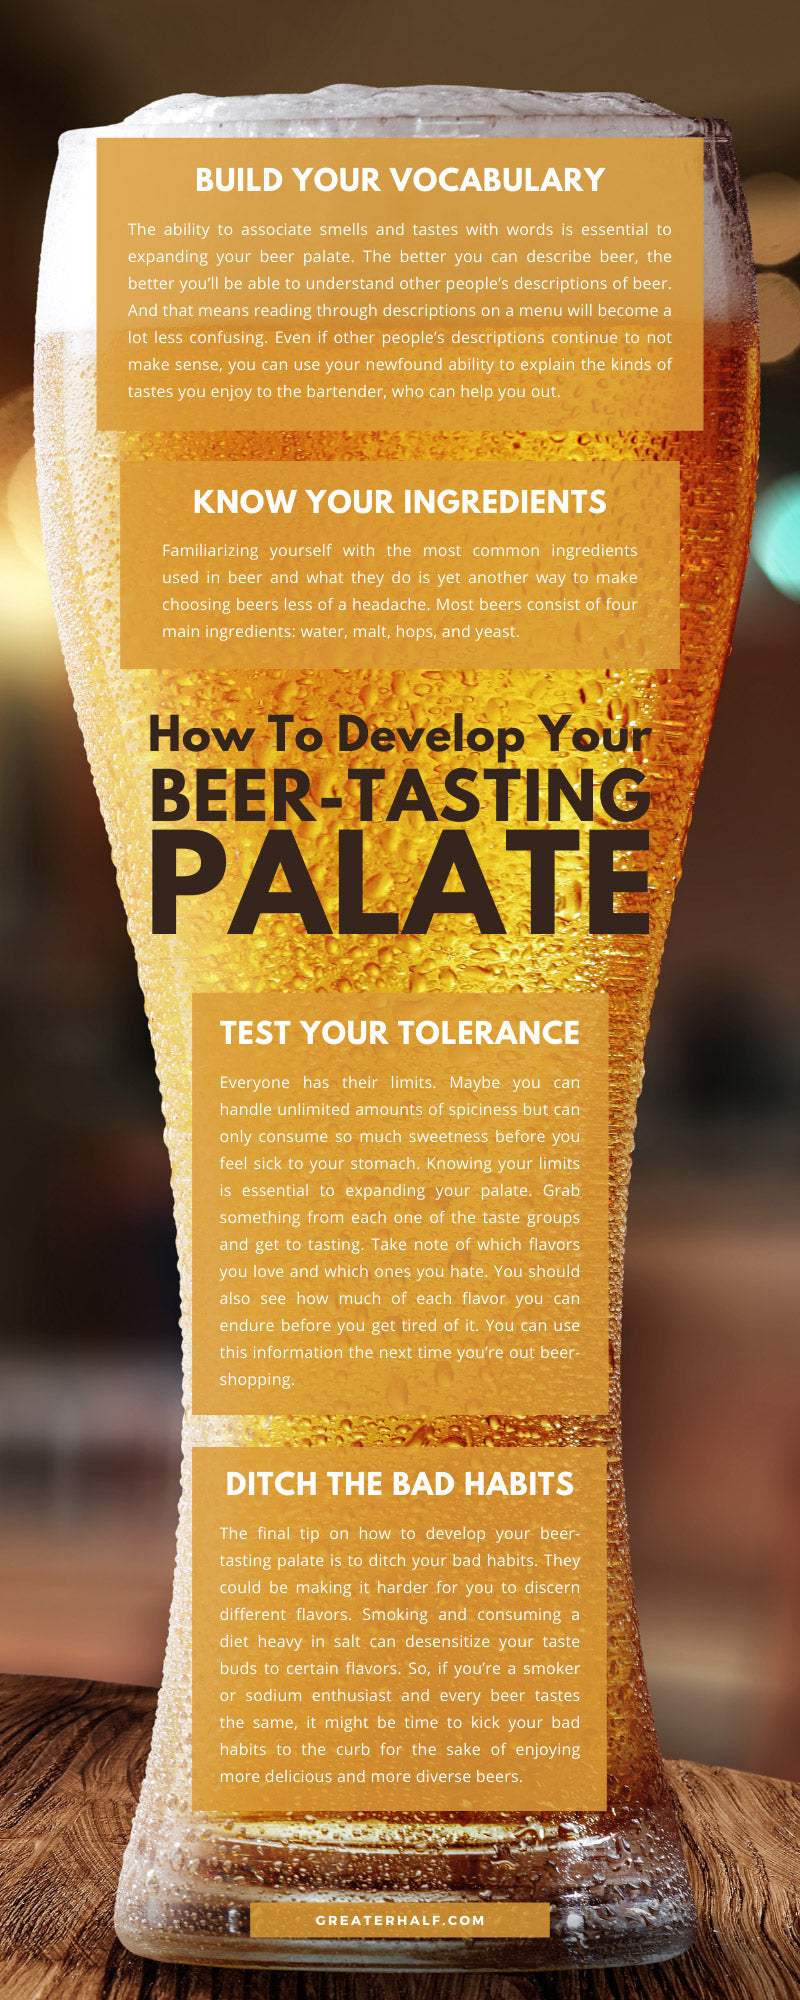 How To Develop Your Beer-Tasting Palate